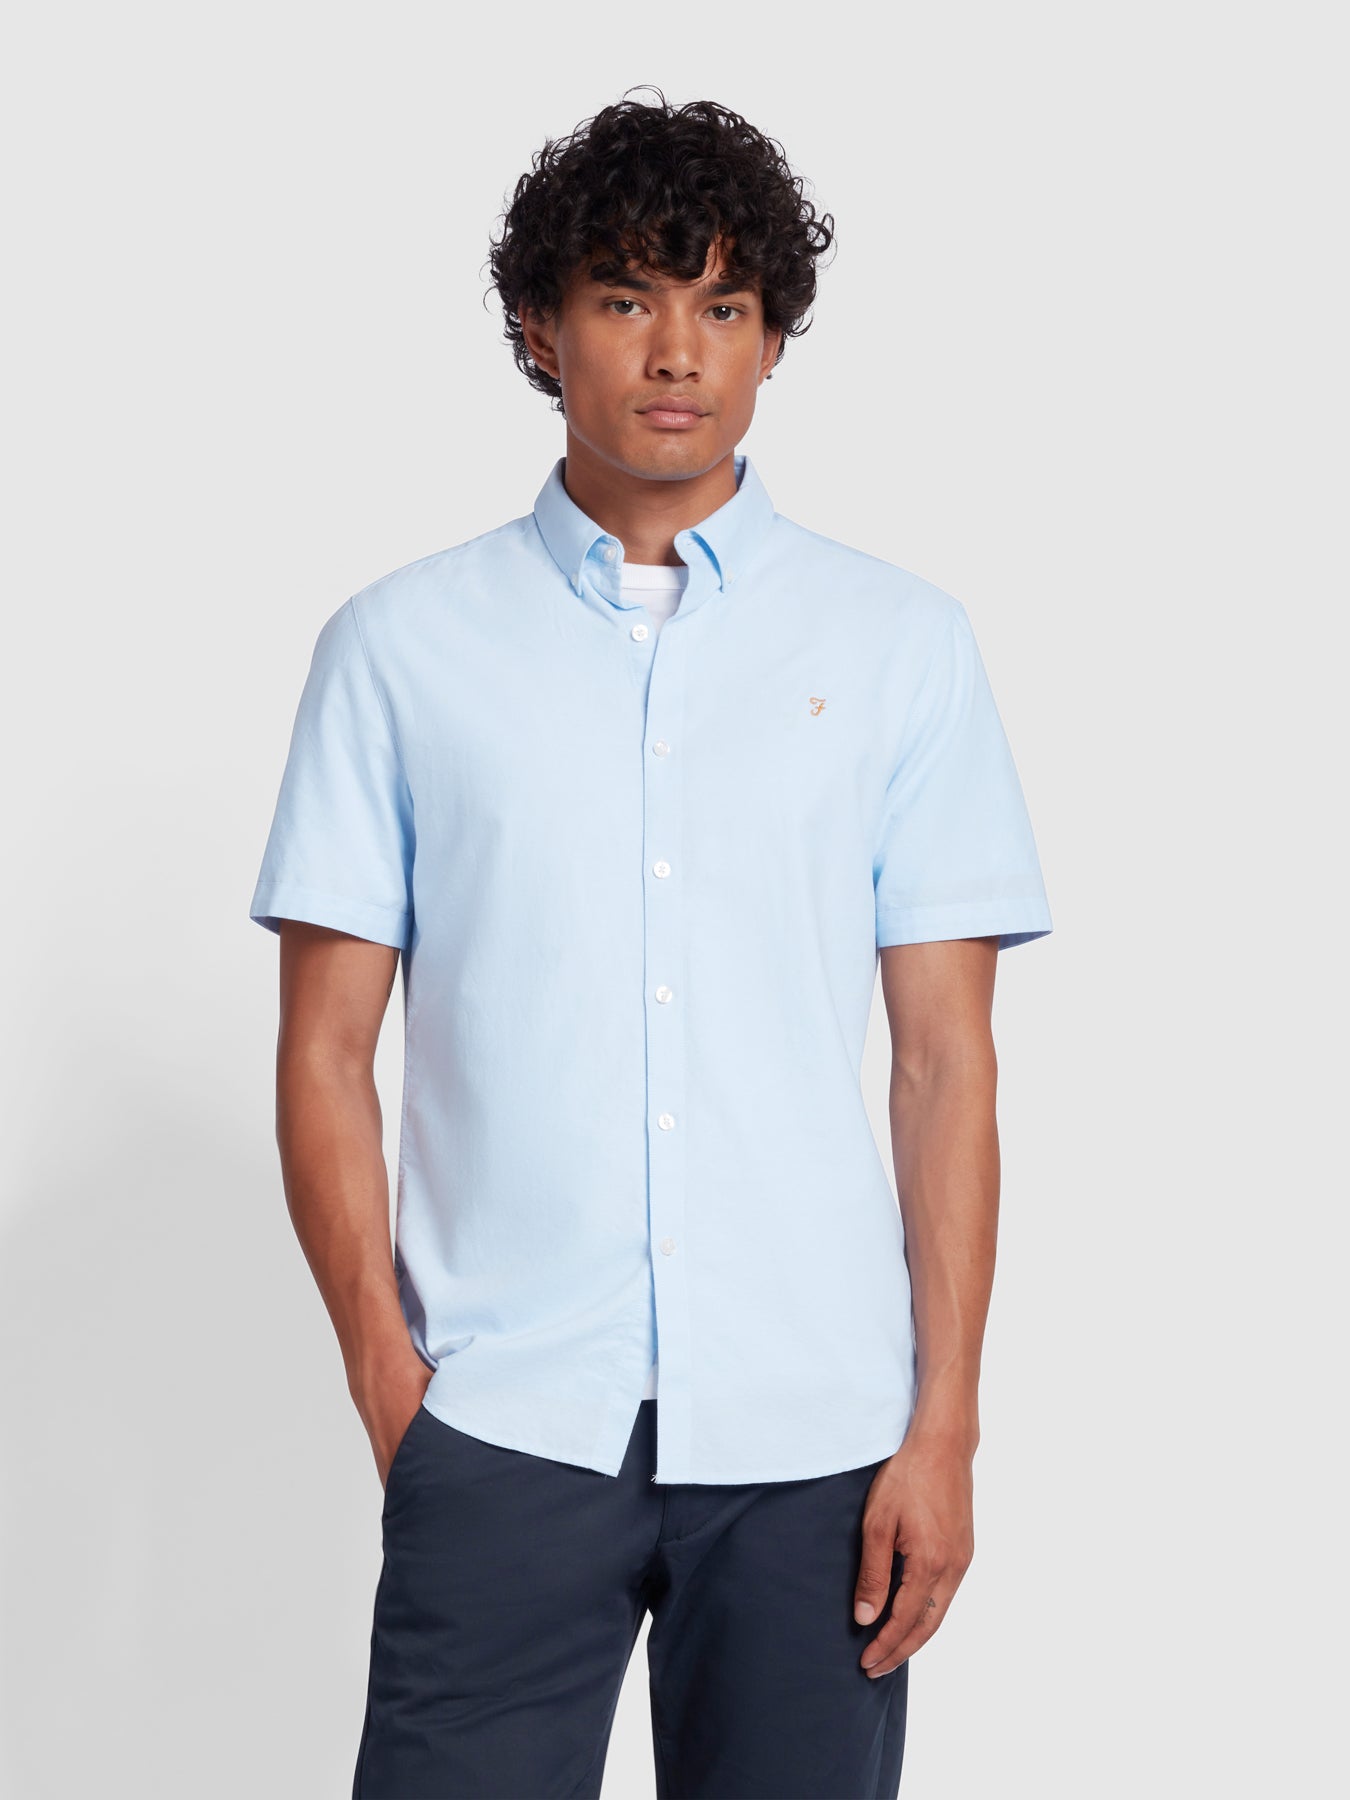 View Brewer Slim Fit Short Sleeve Organic Cotton Oxford Shirt In Sky Blue information